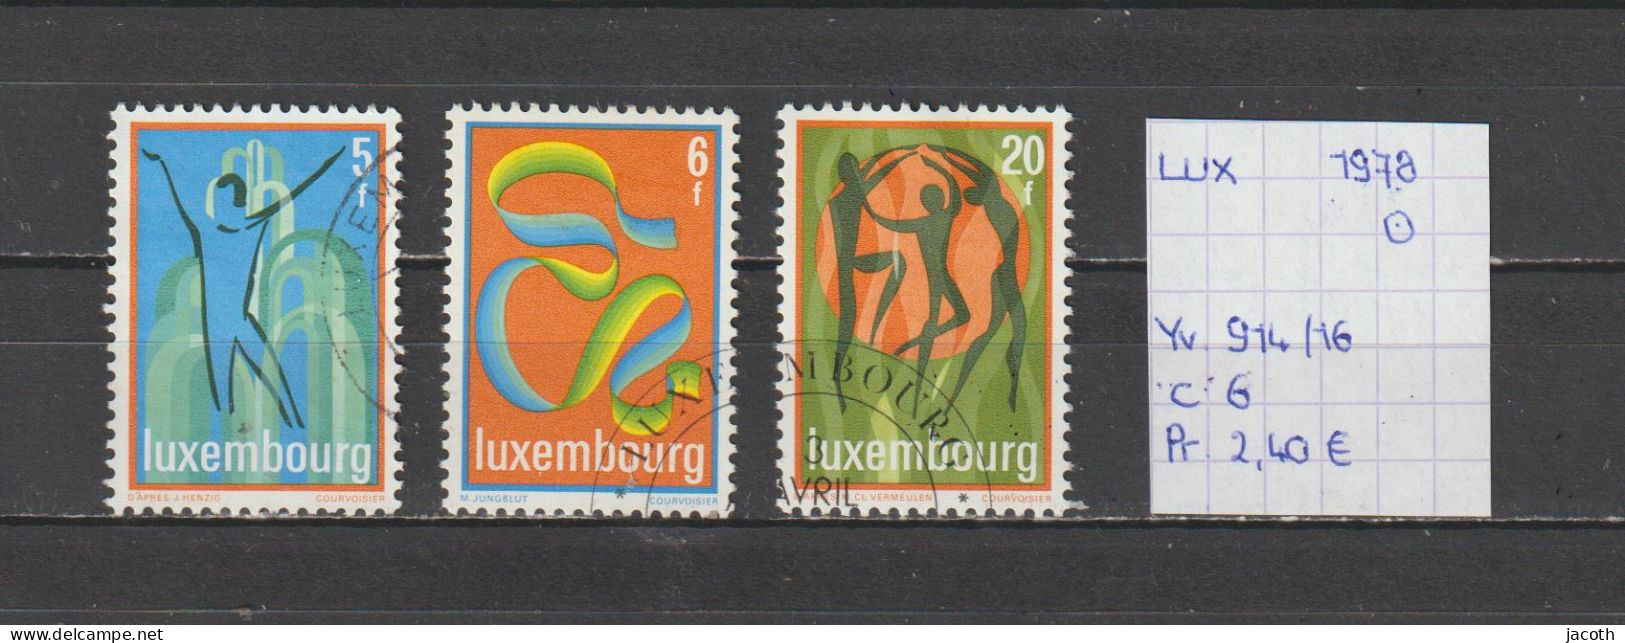 (TJ) Luxembourg 1978 - YT 914/16 (gest./obl./used) - Usati